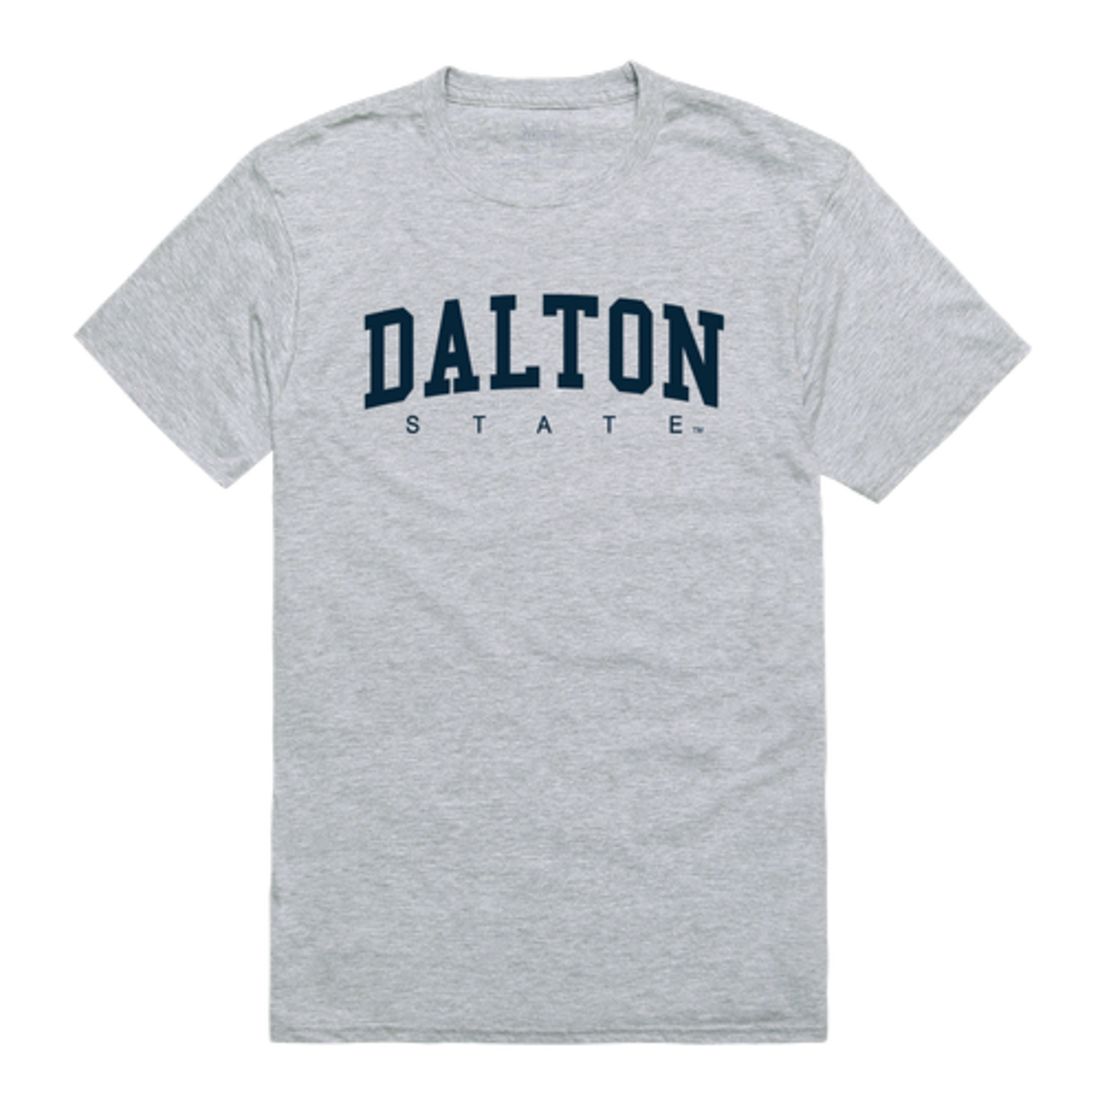 Dalton State College Roadrunners Game Day T-Shirt Tee